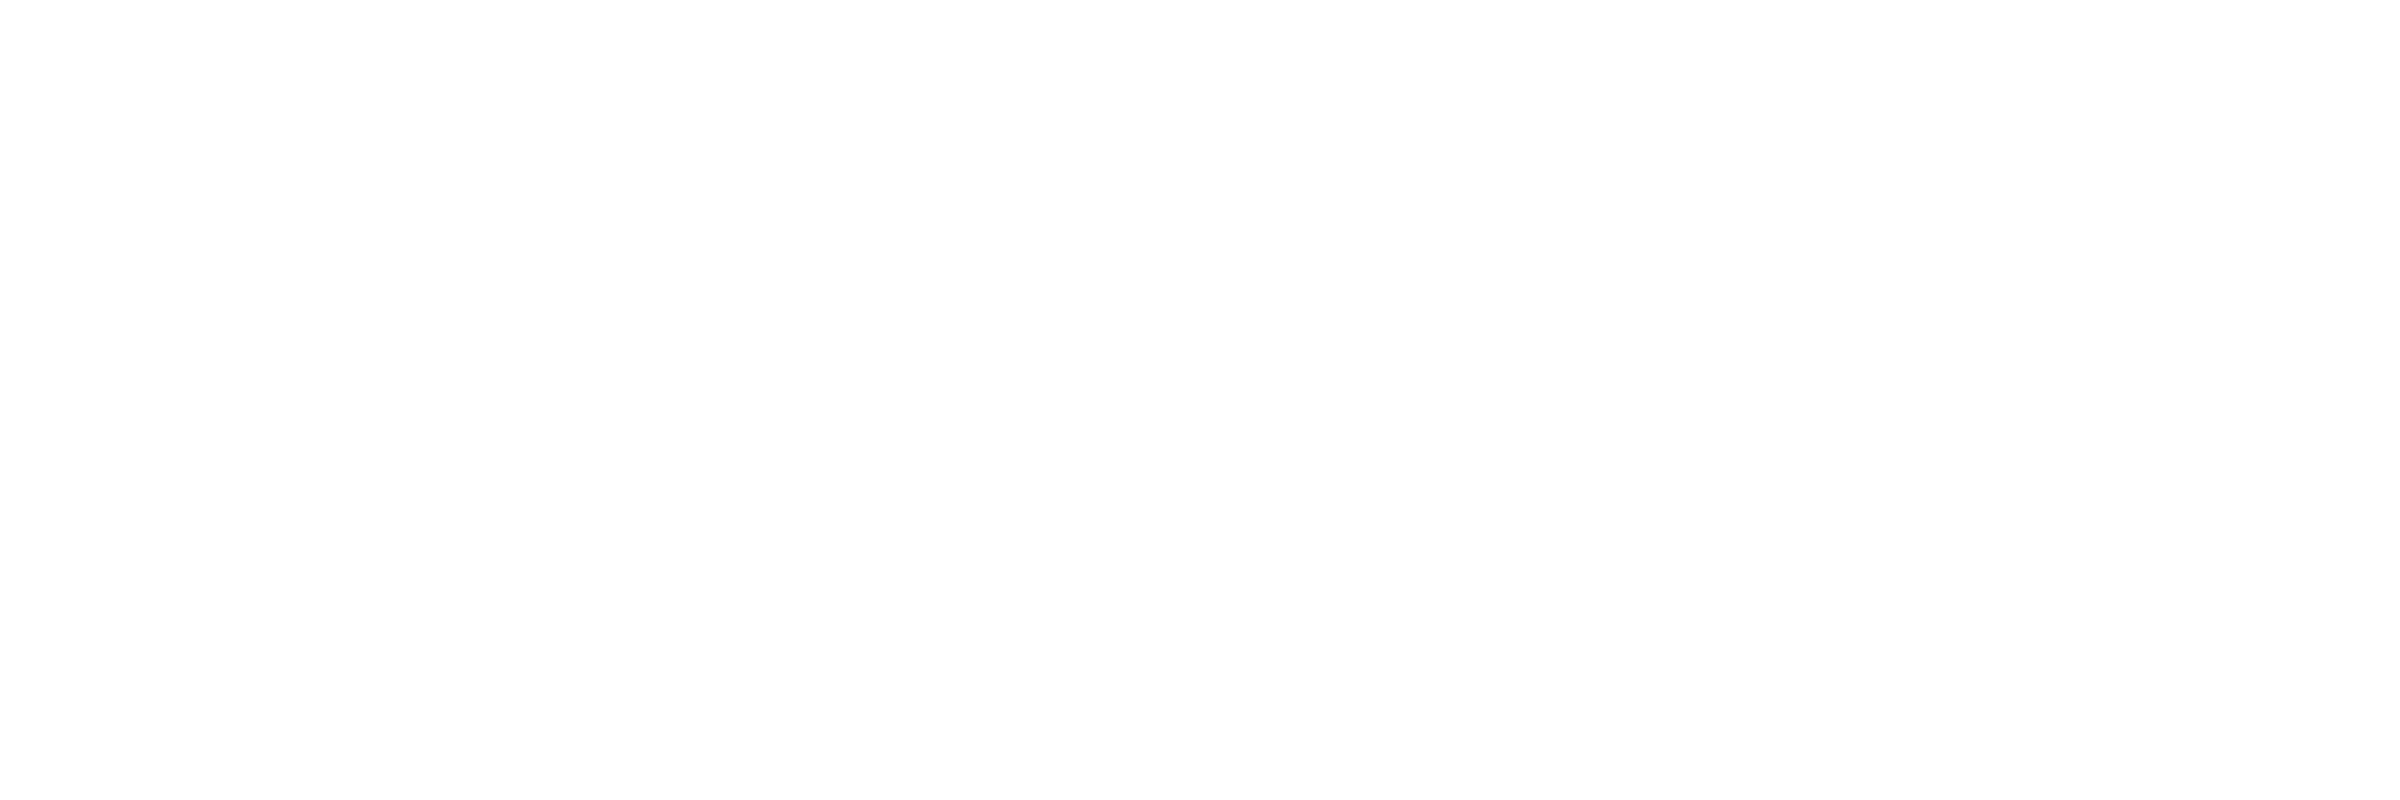 Hqpornstep Mom - bodyright - Own your body online | Bodily Integrity | UNFPA